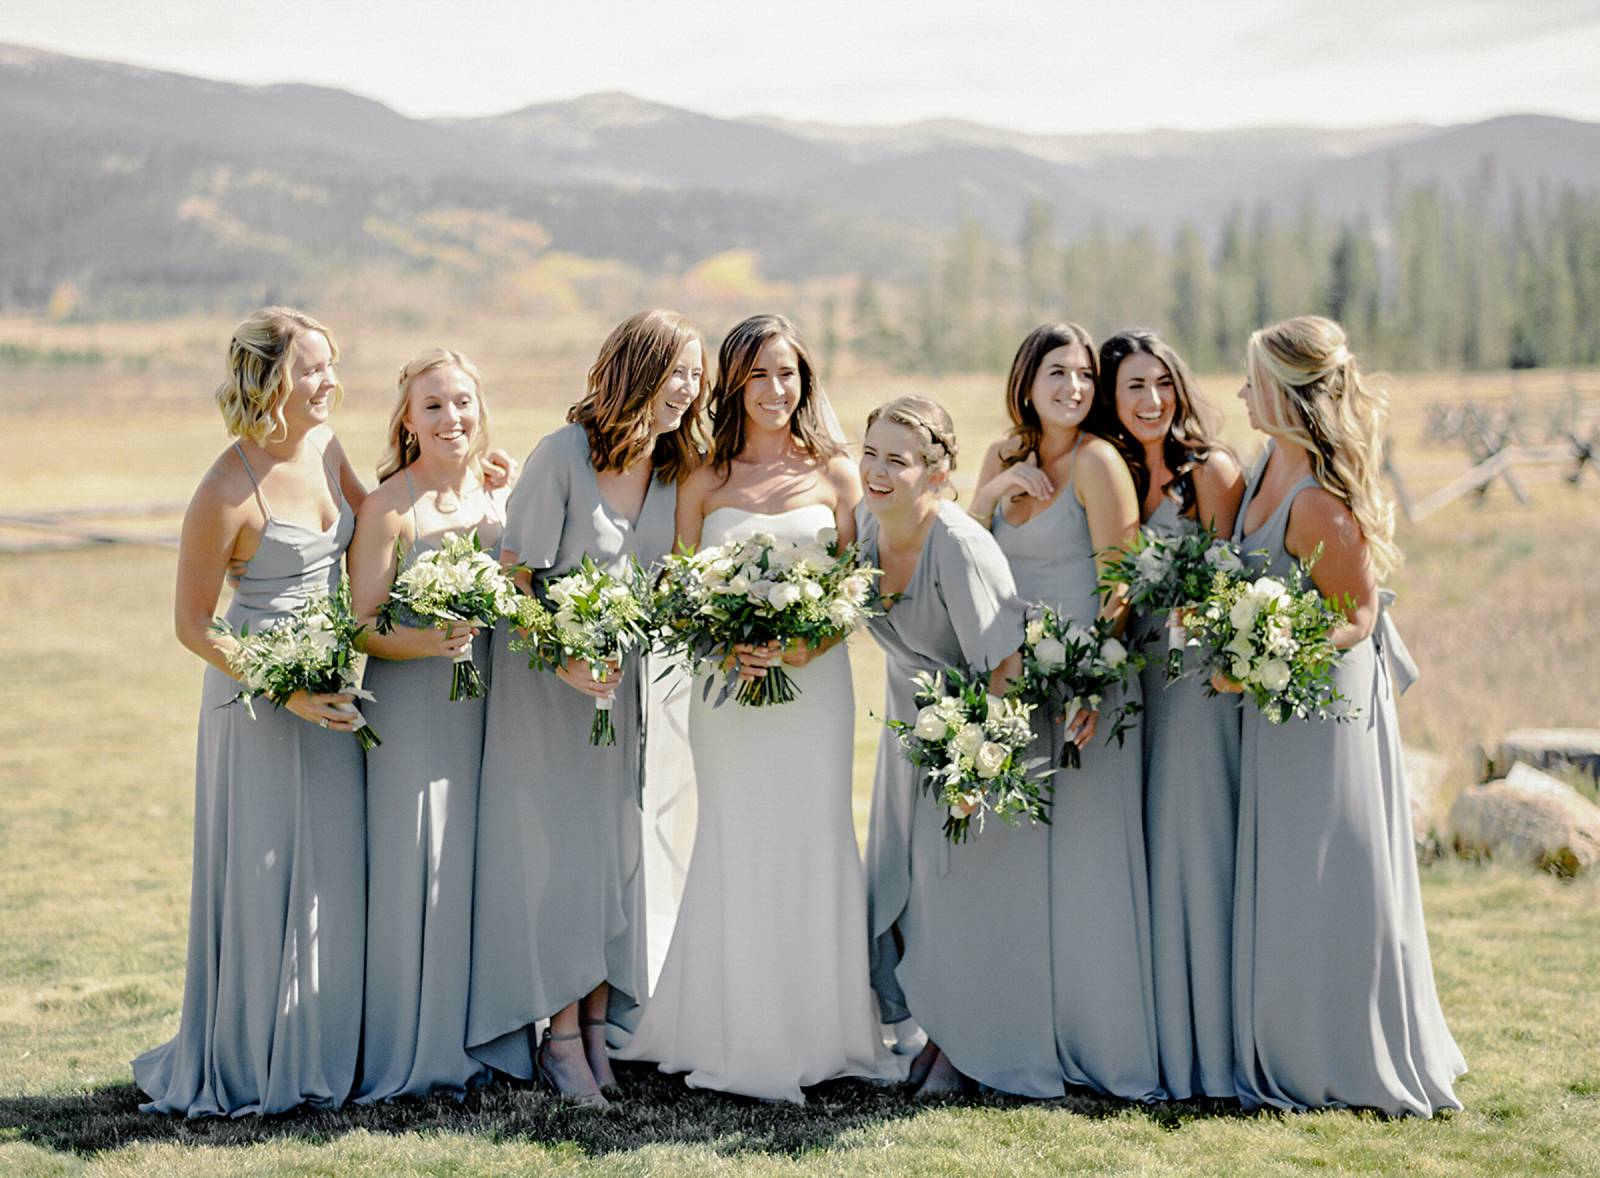 Understated Modern Rustic wedding at Devil's Thumb Ranch | Colorado ...